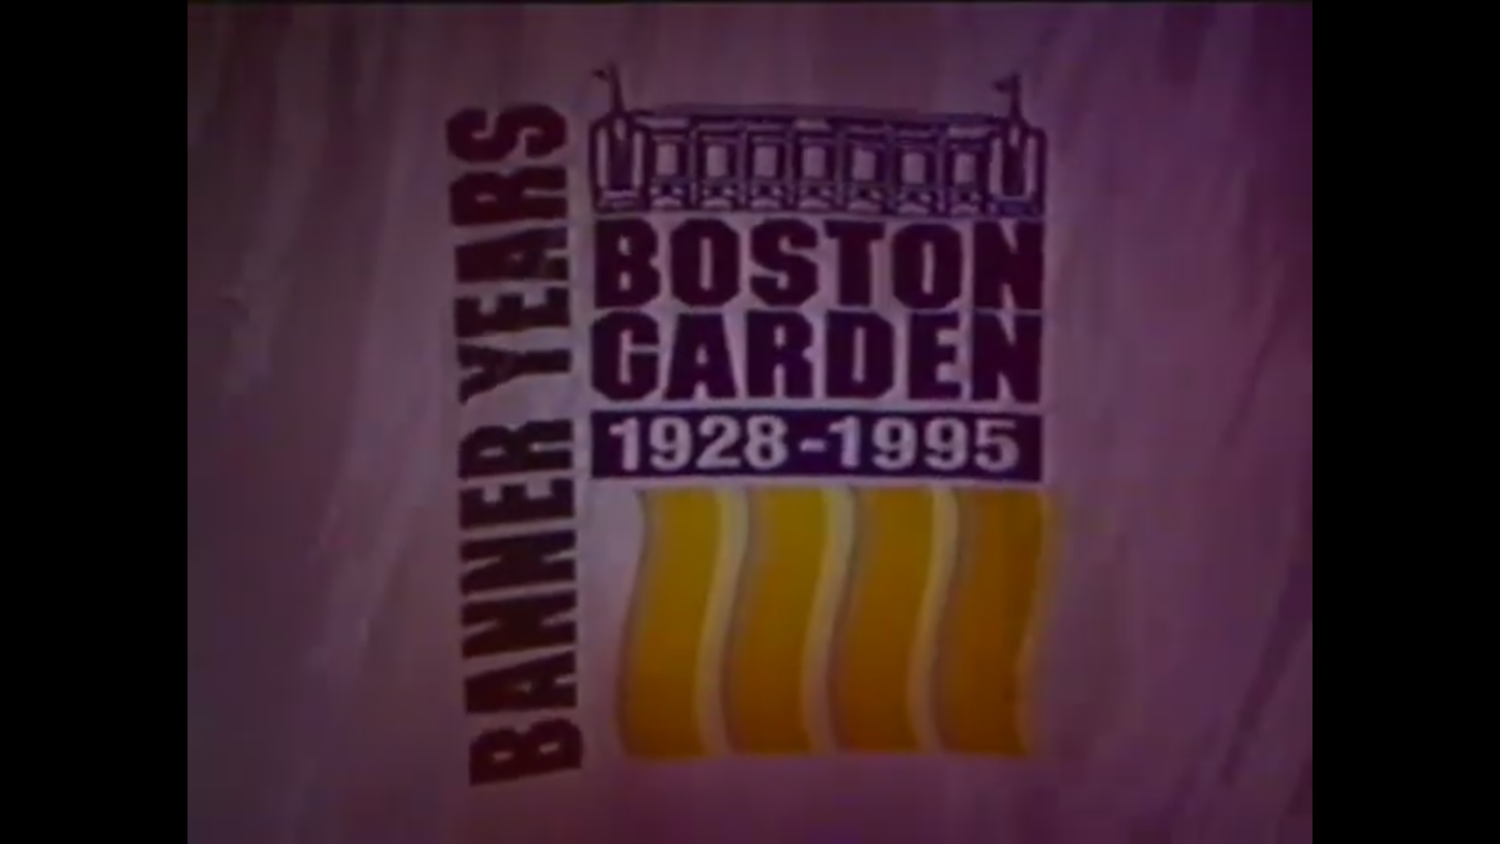 The Official History of the Boston Garden: Relive and Remember the Boston Garden Banner Years